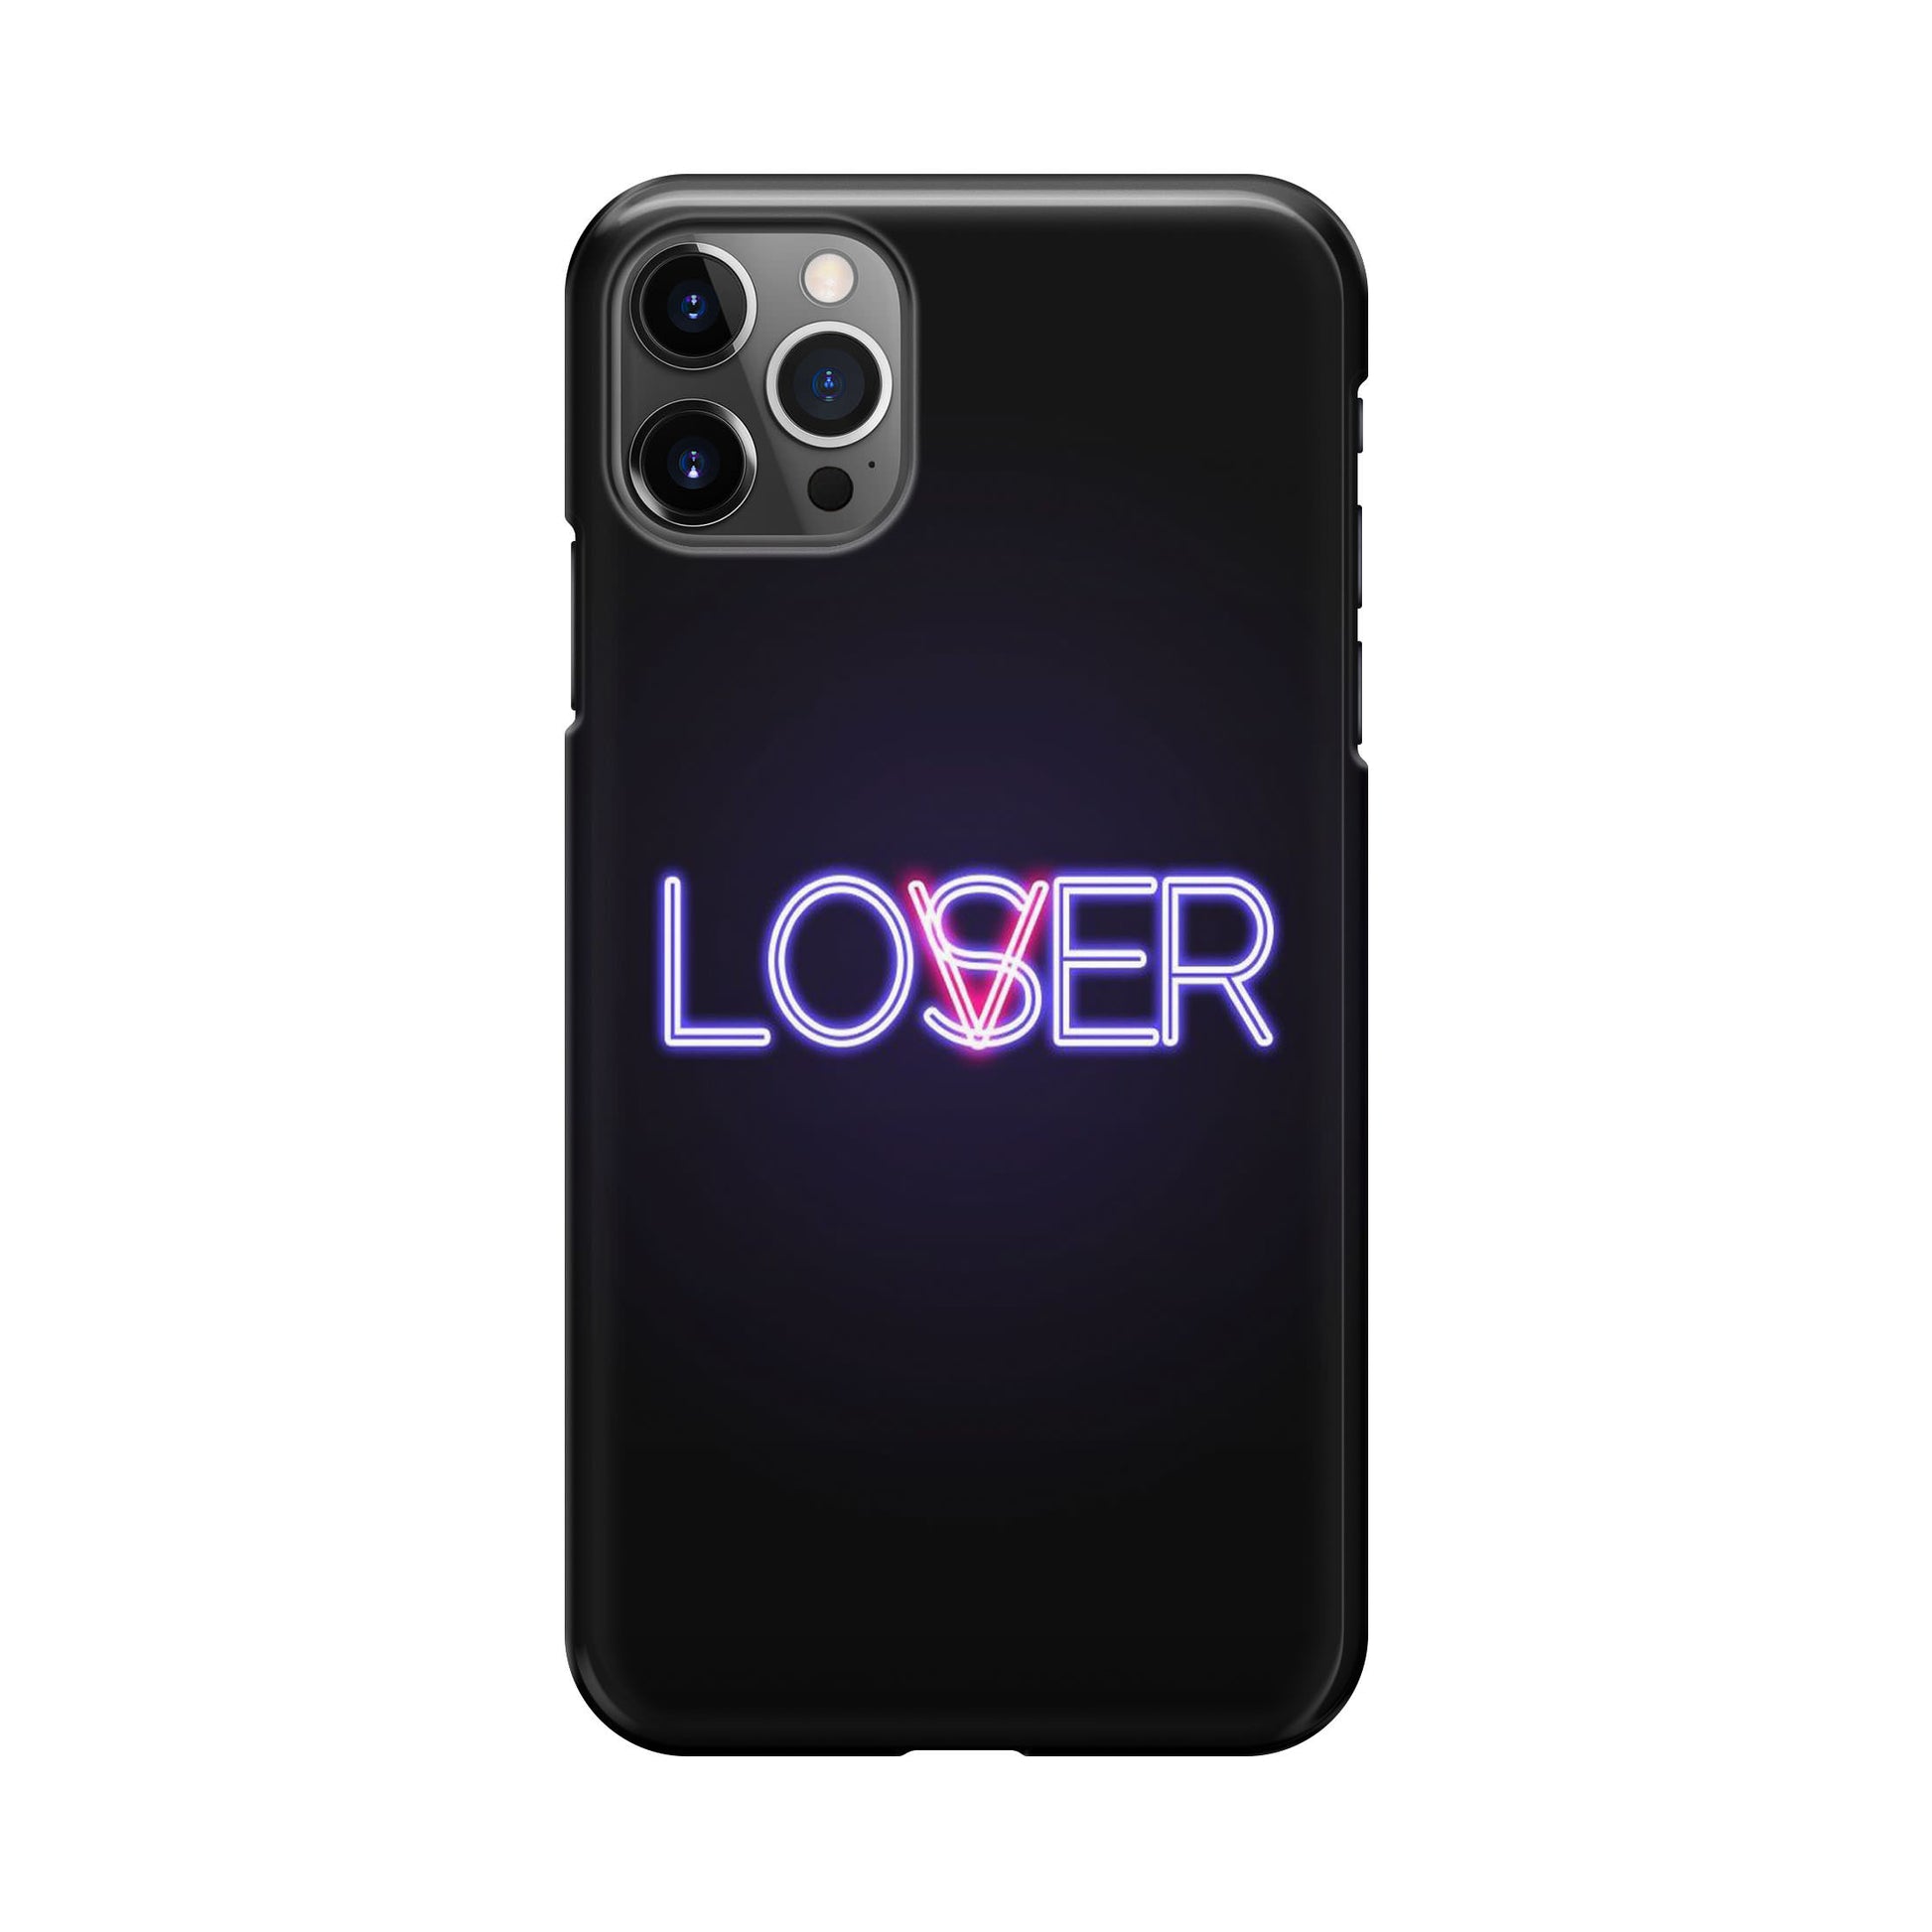 Loser or Lover iPhone 12 Pro Max Case